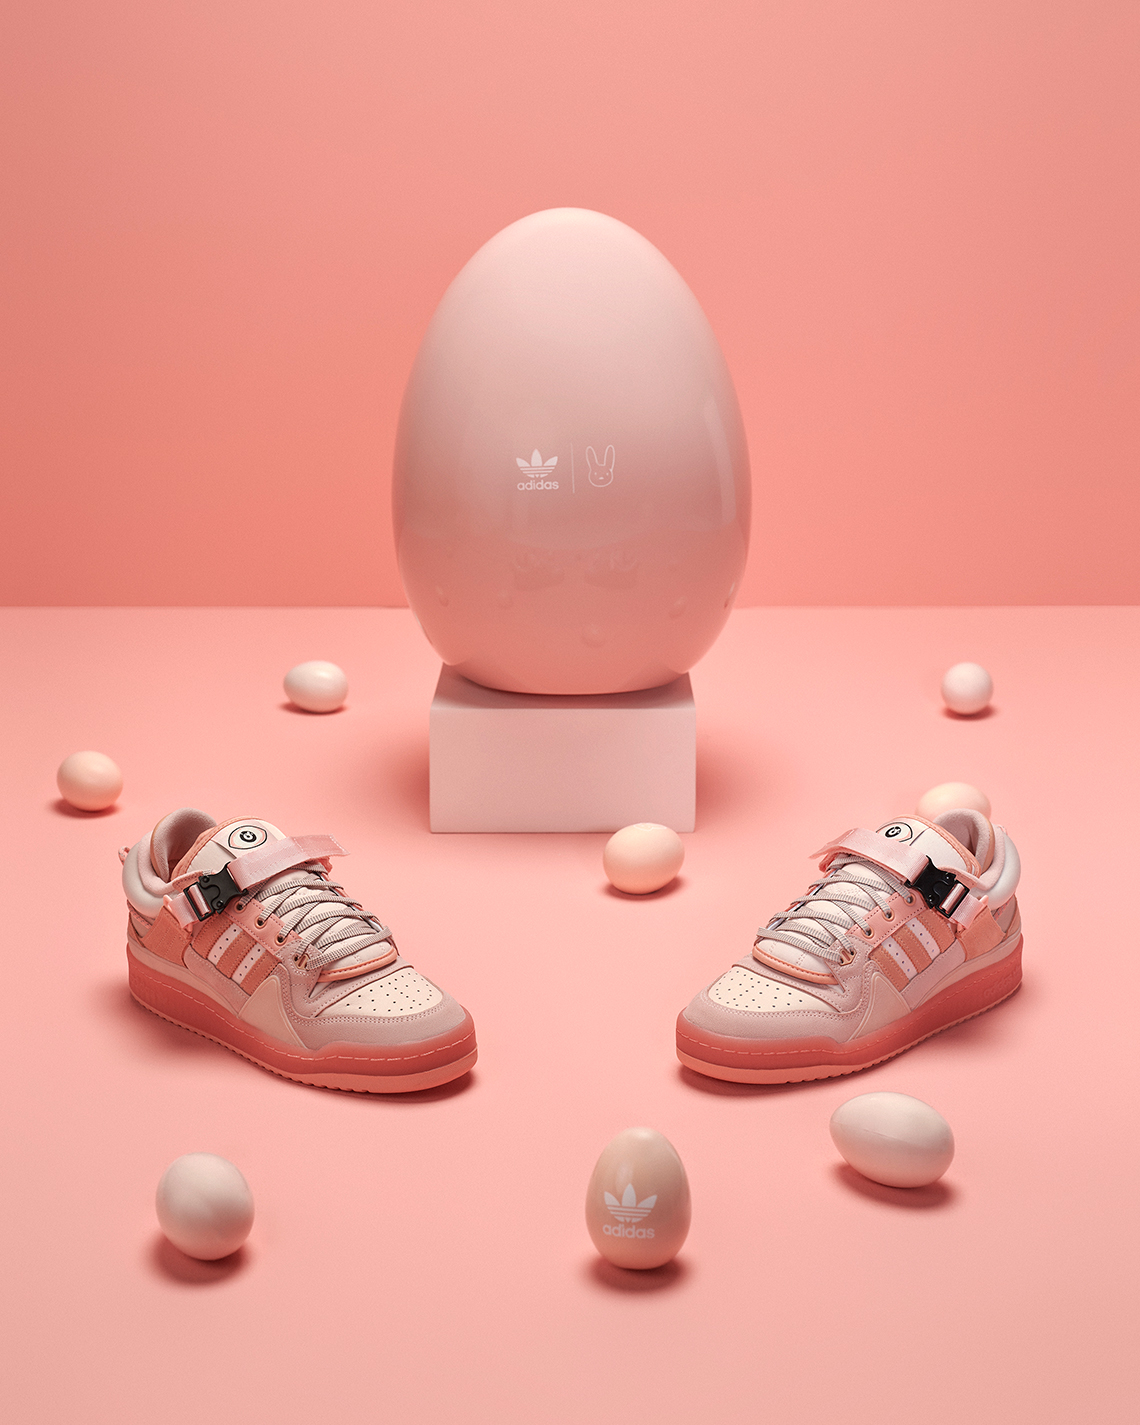 Bad Bunny Adidas boot Pink Shoes Release Date 5